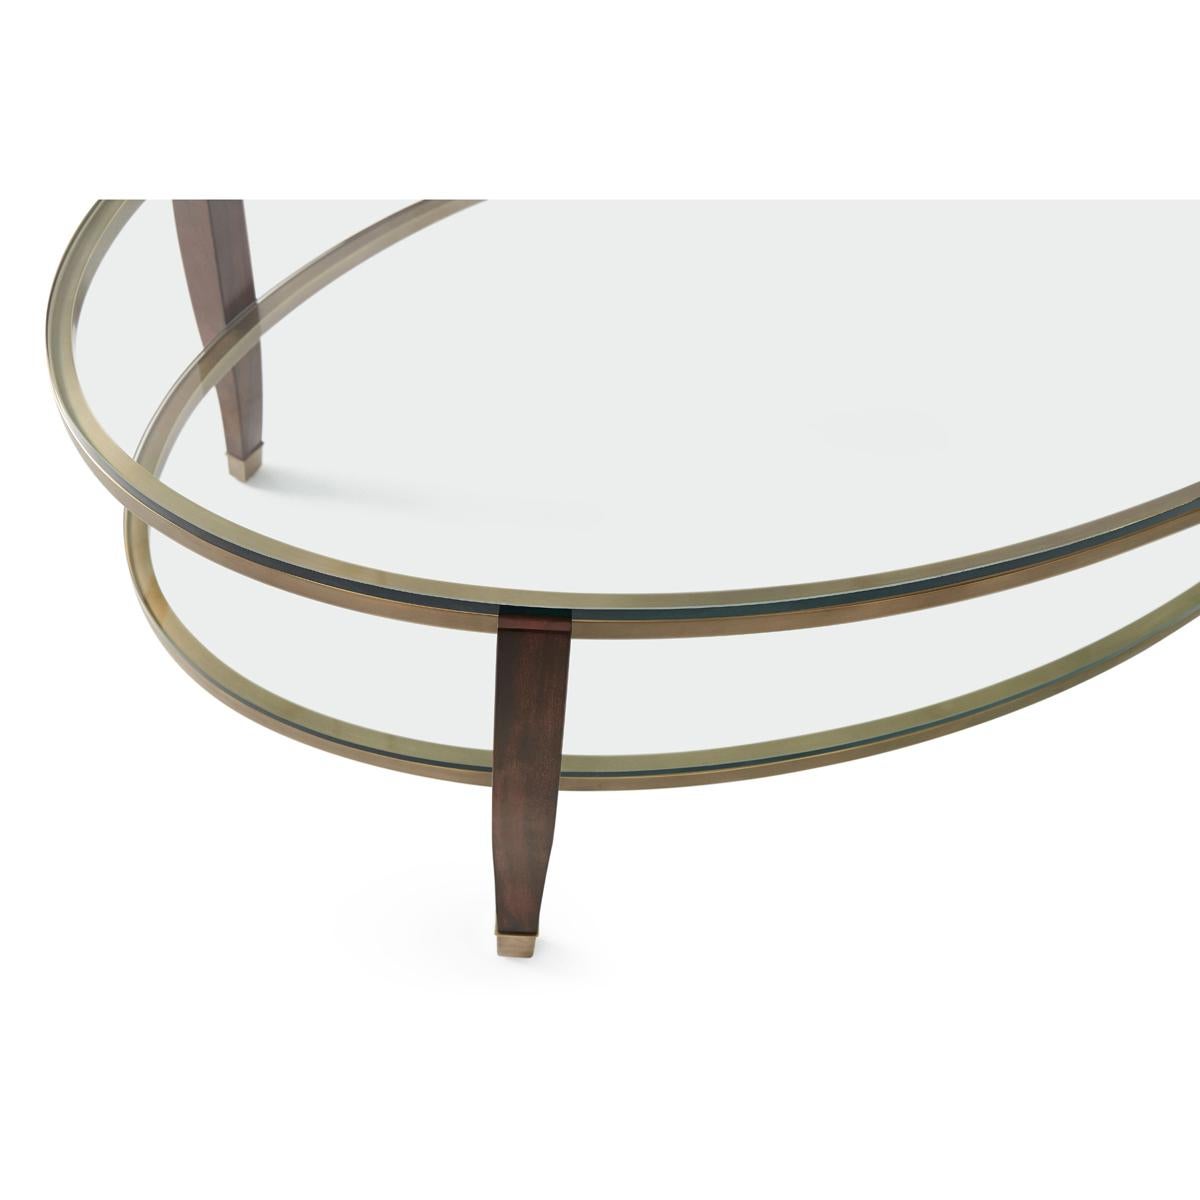 An oval two-tier glass top coffee table with mahogany supports accented with brass feet. It has two oval brass-bound tempered glass tiers. 

Dimensions: 52